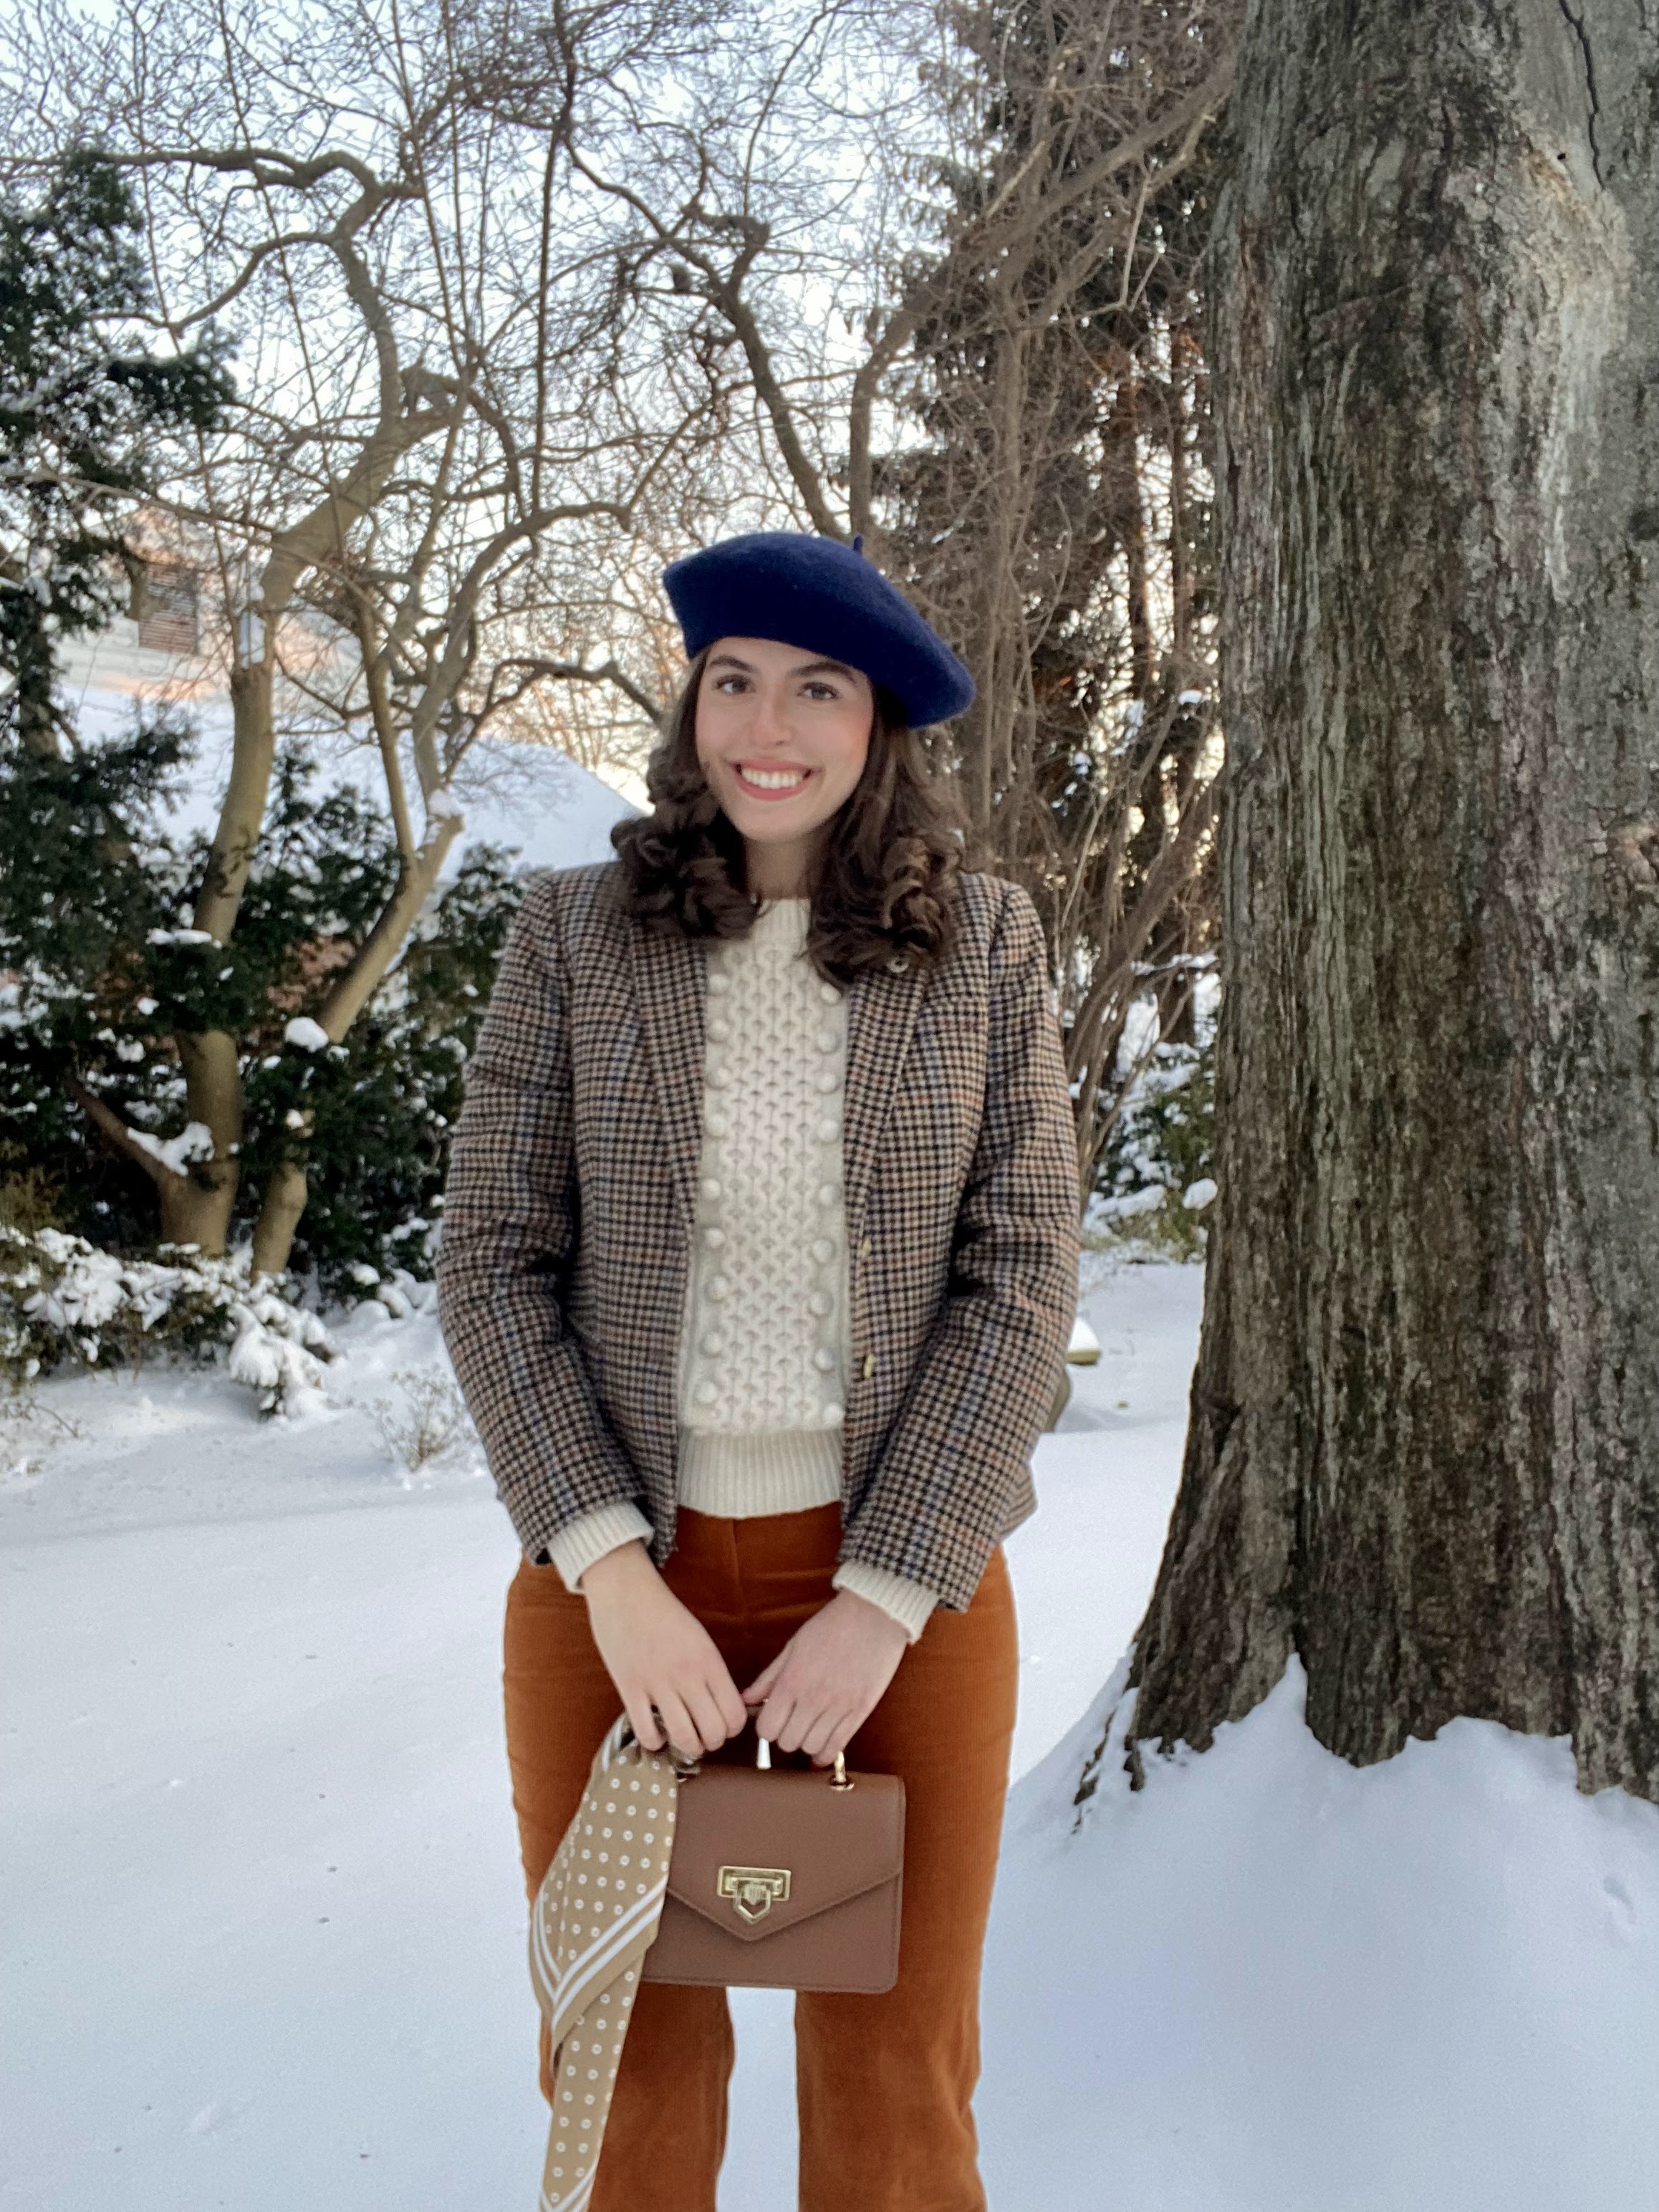 beret, cable knit, tweed blazer, preppy outfit, cords, corduroy, snow, winter outfit